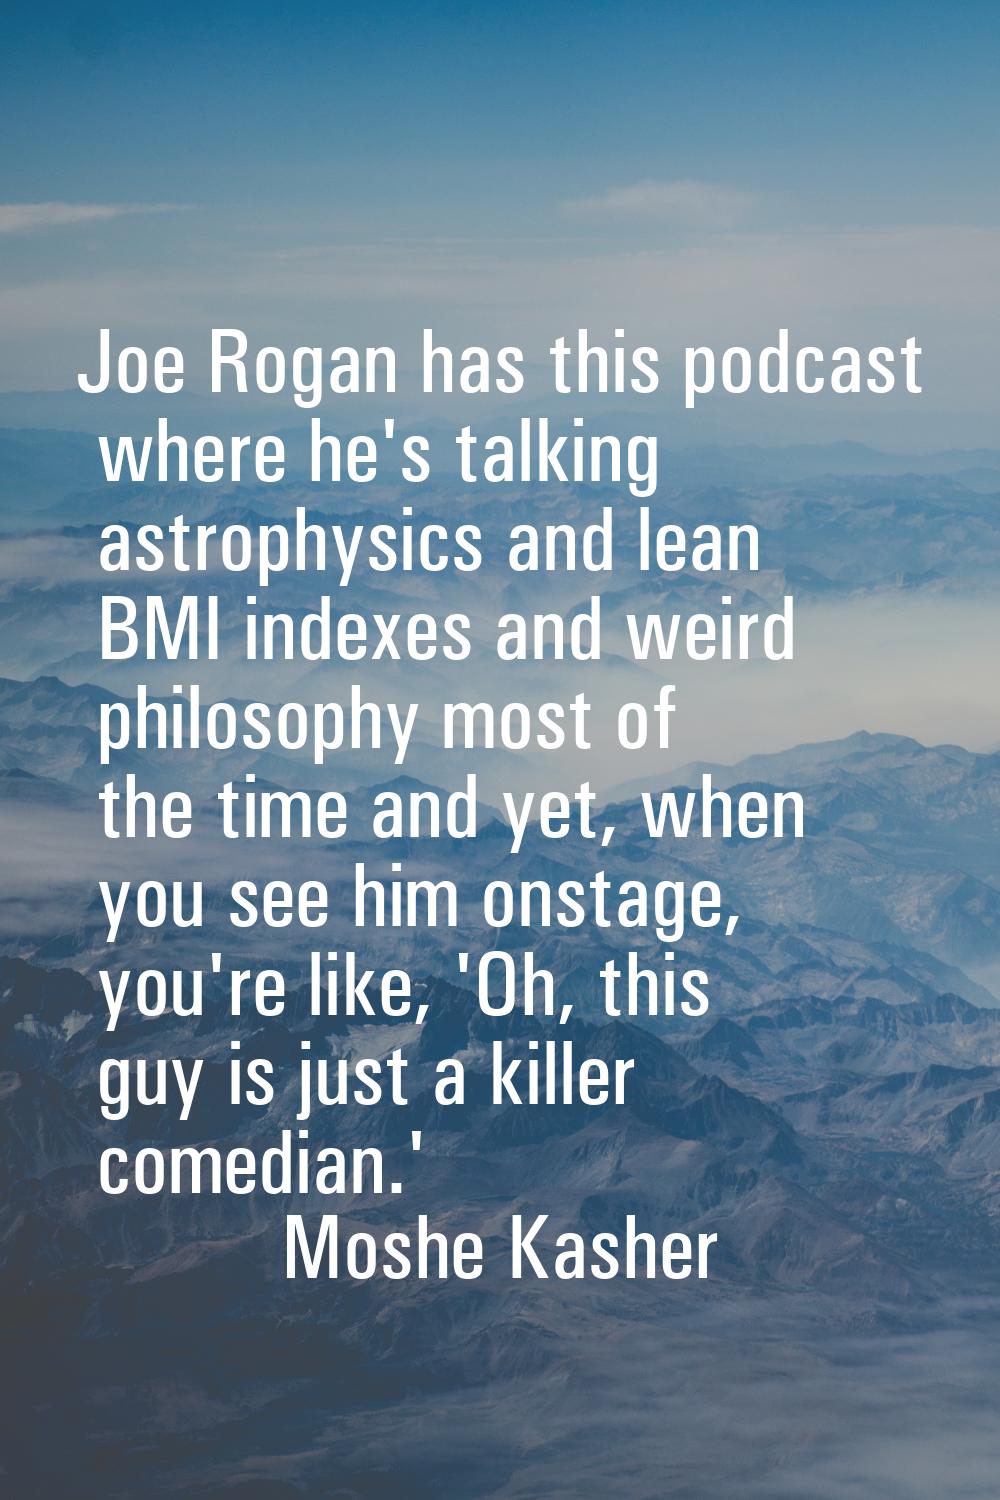 Joe Rogan has this podcast where he's talking astrophysics and lean BMI indexes and weird philosoph